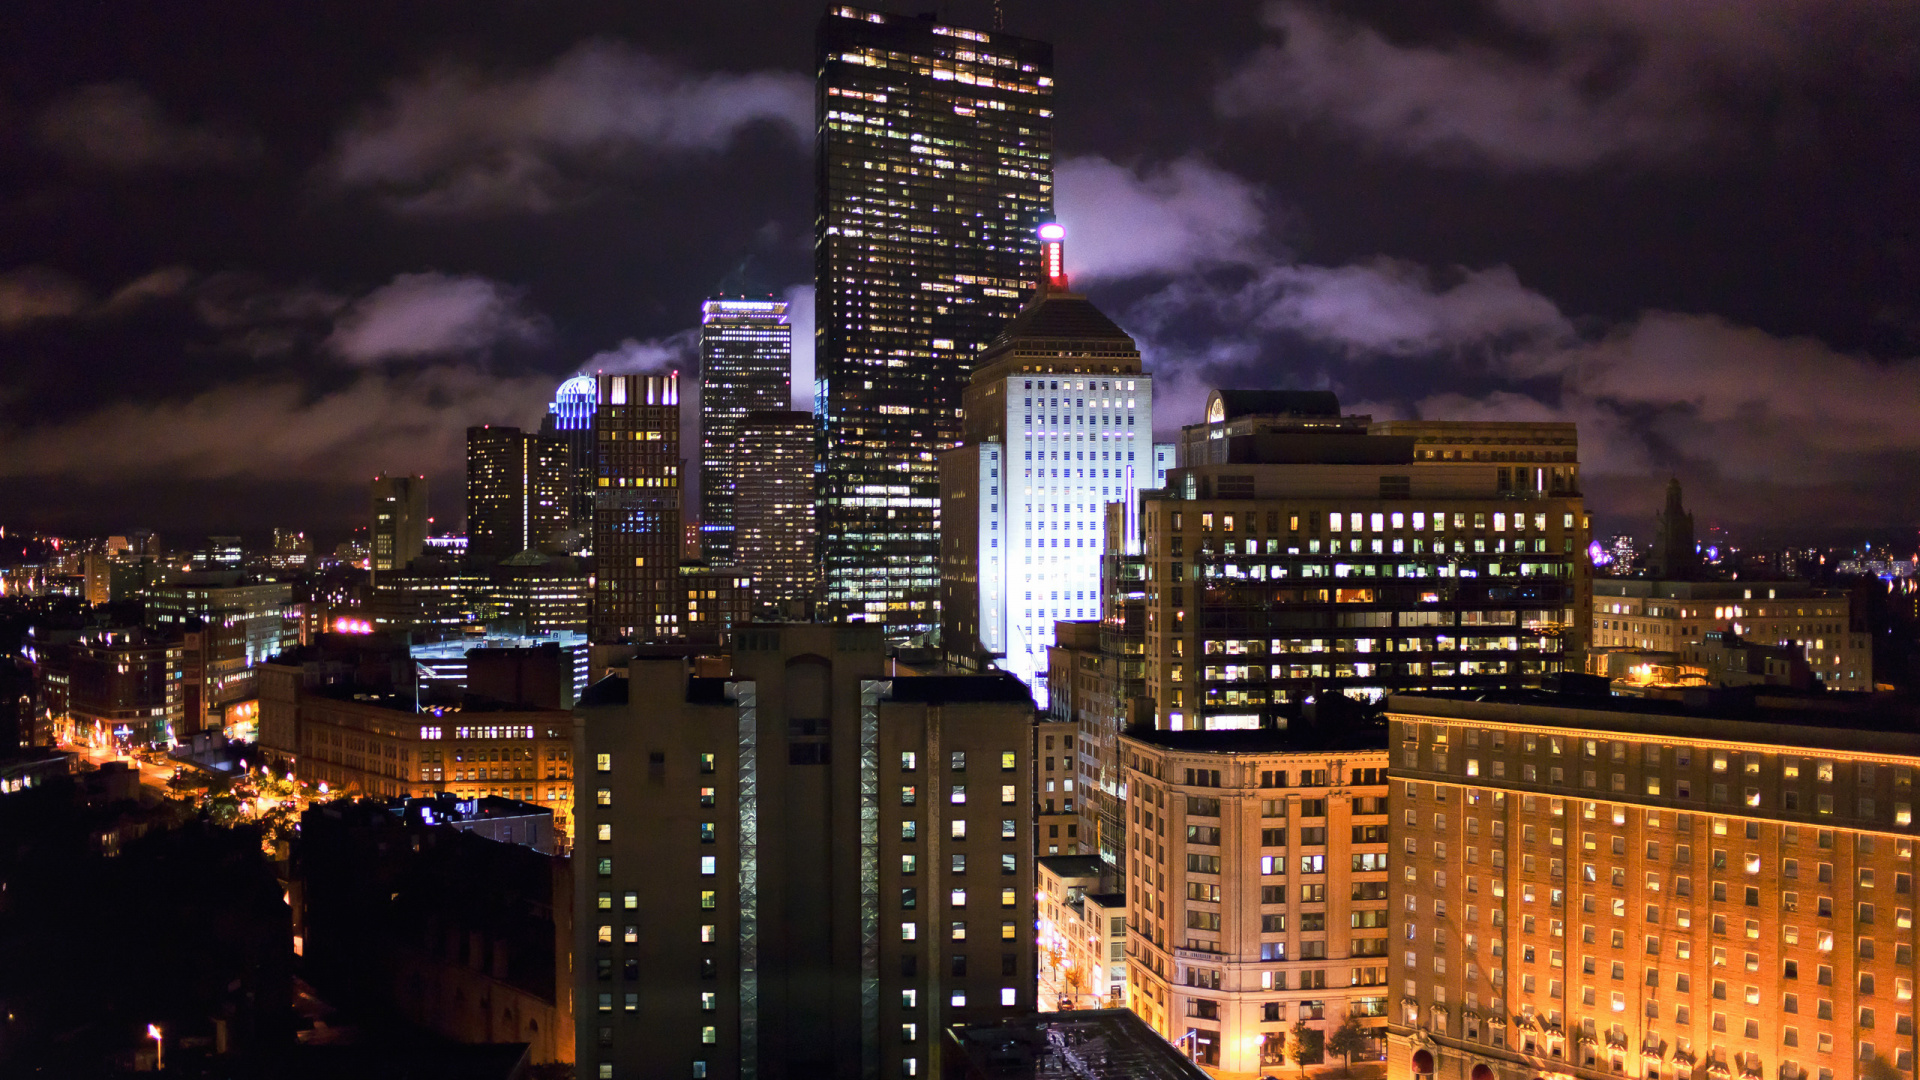 City Buildings Under Dark Cloudy Sky During Night Time. Wallpaper in 1920x1080 Resolution